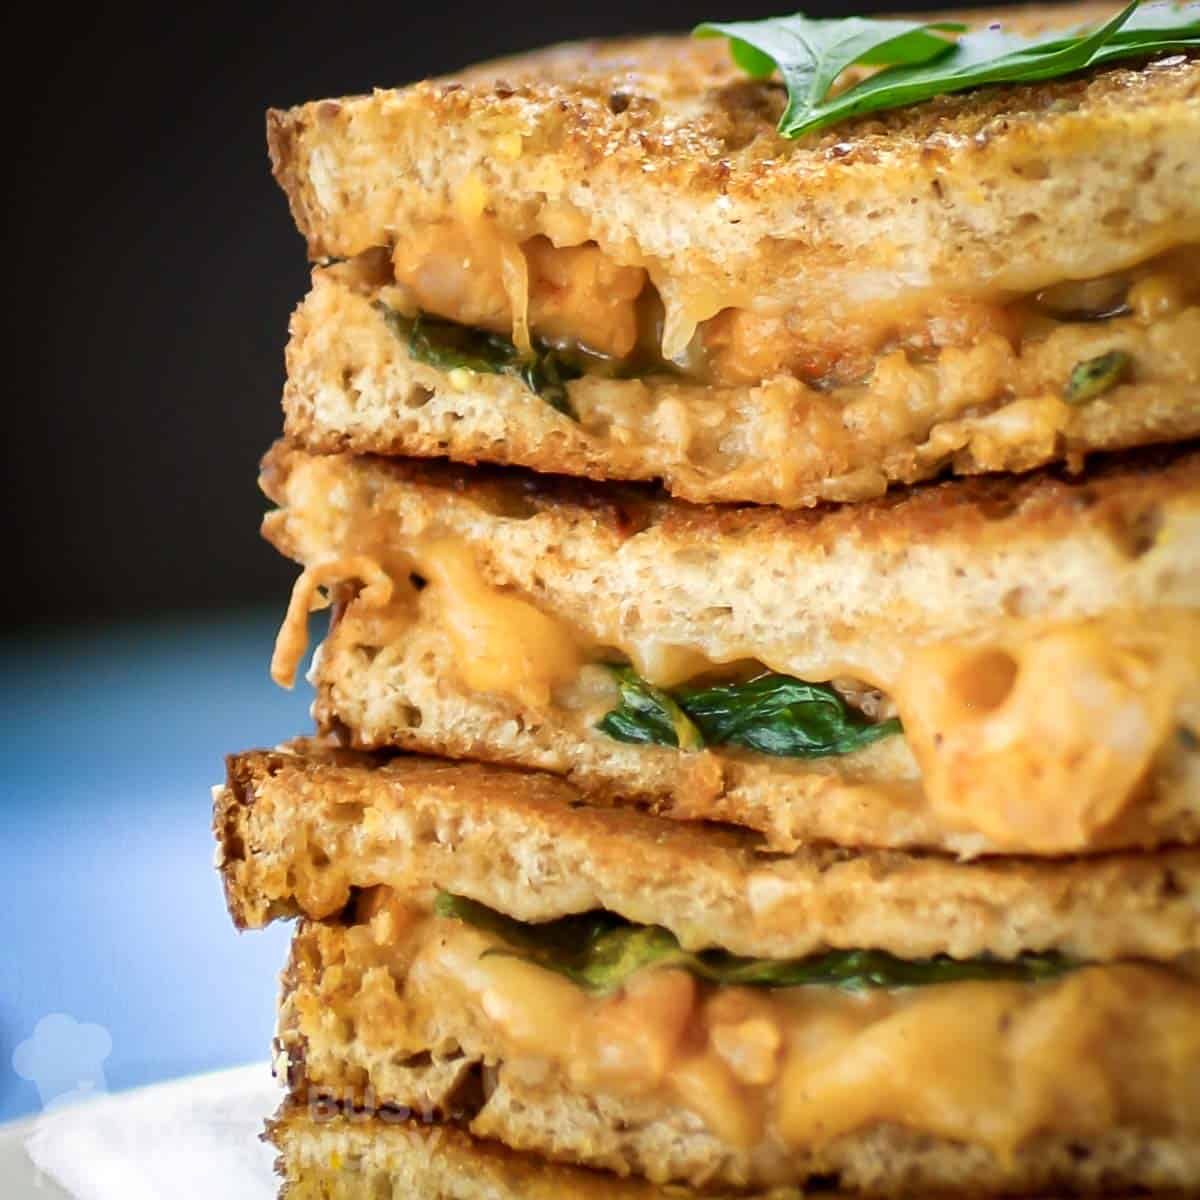 Close up side view of four halves of grilled cheese stacked on each other garnished with herbs on a white plate on a white surface.